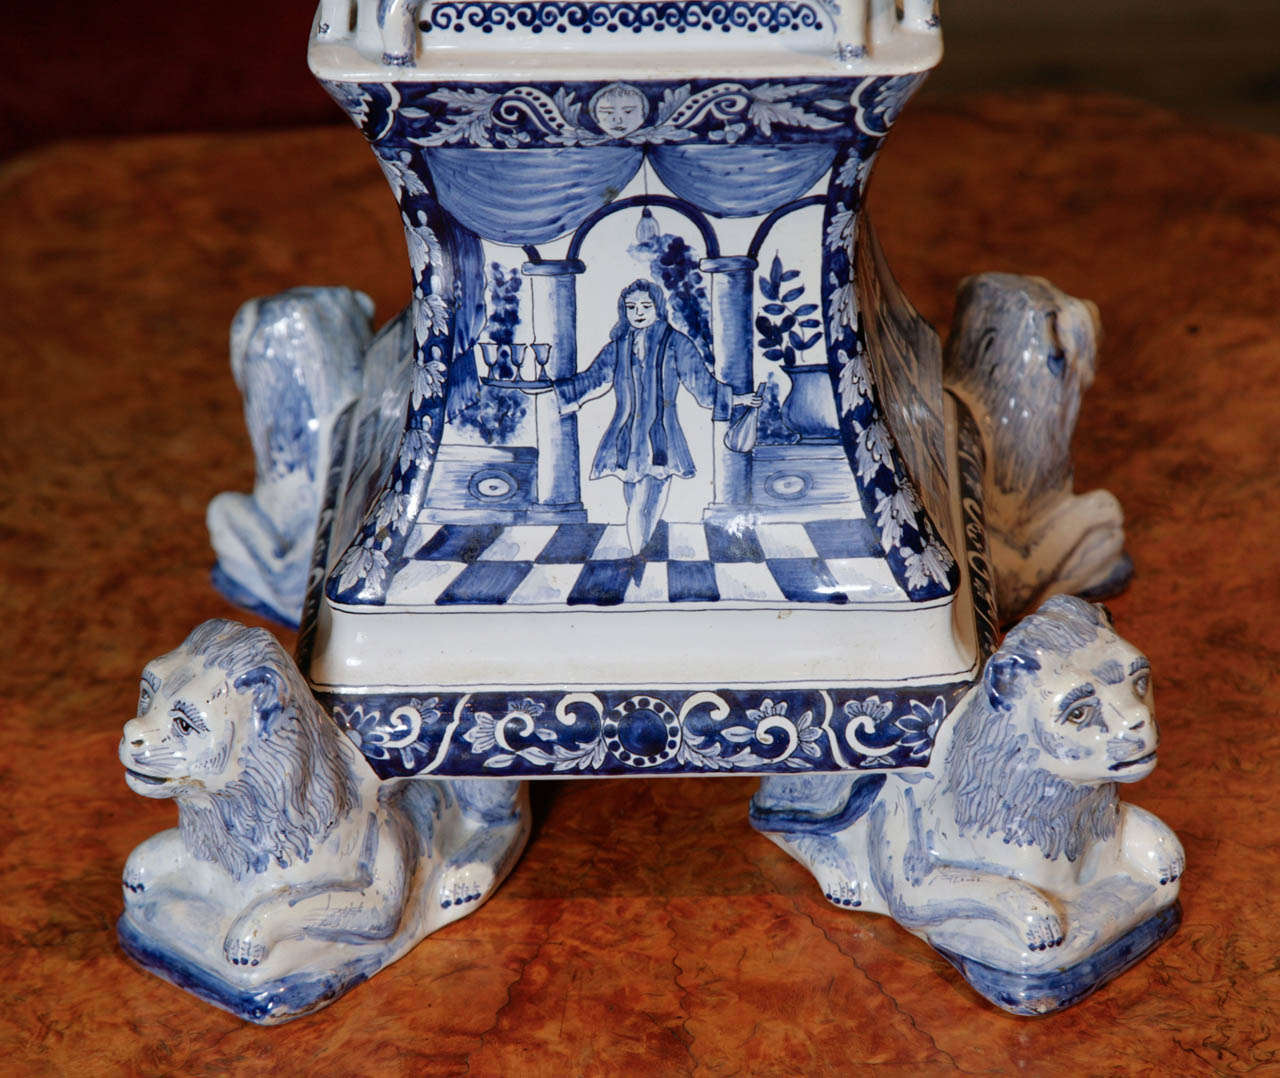 Other Delft Tulip Vase Made by Christian Dior Décor